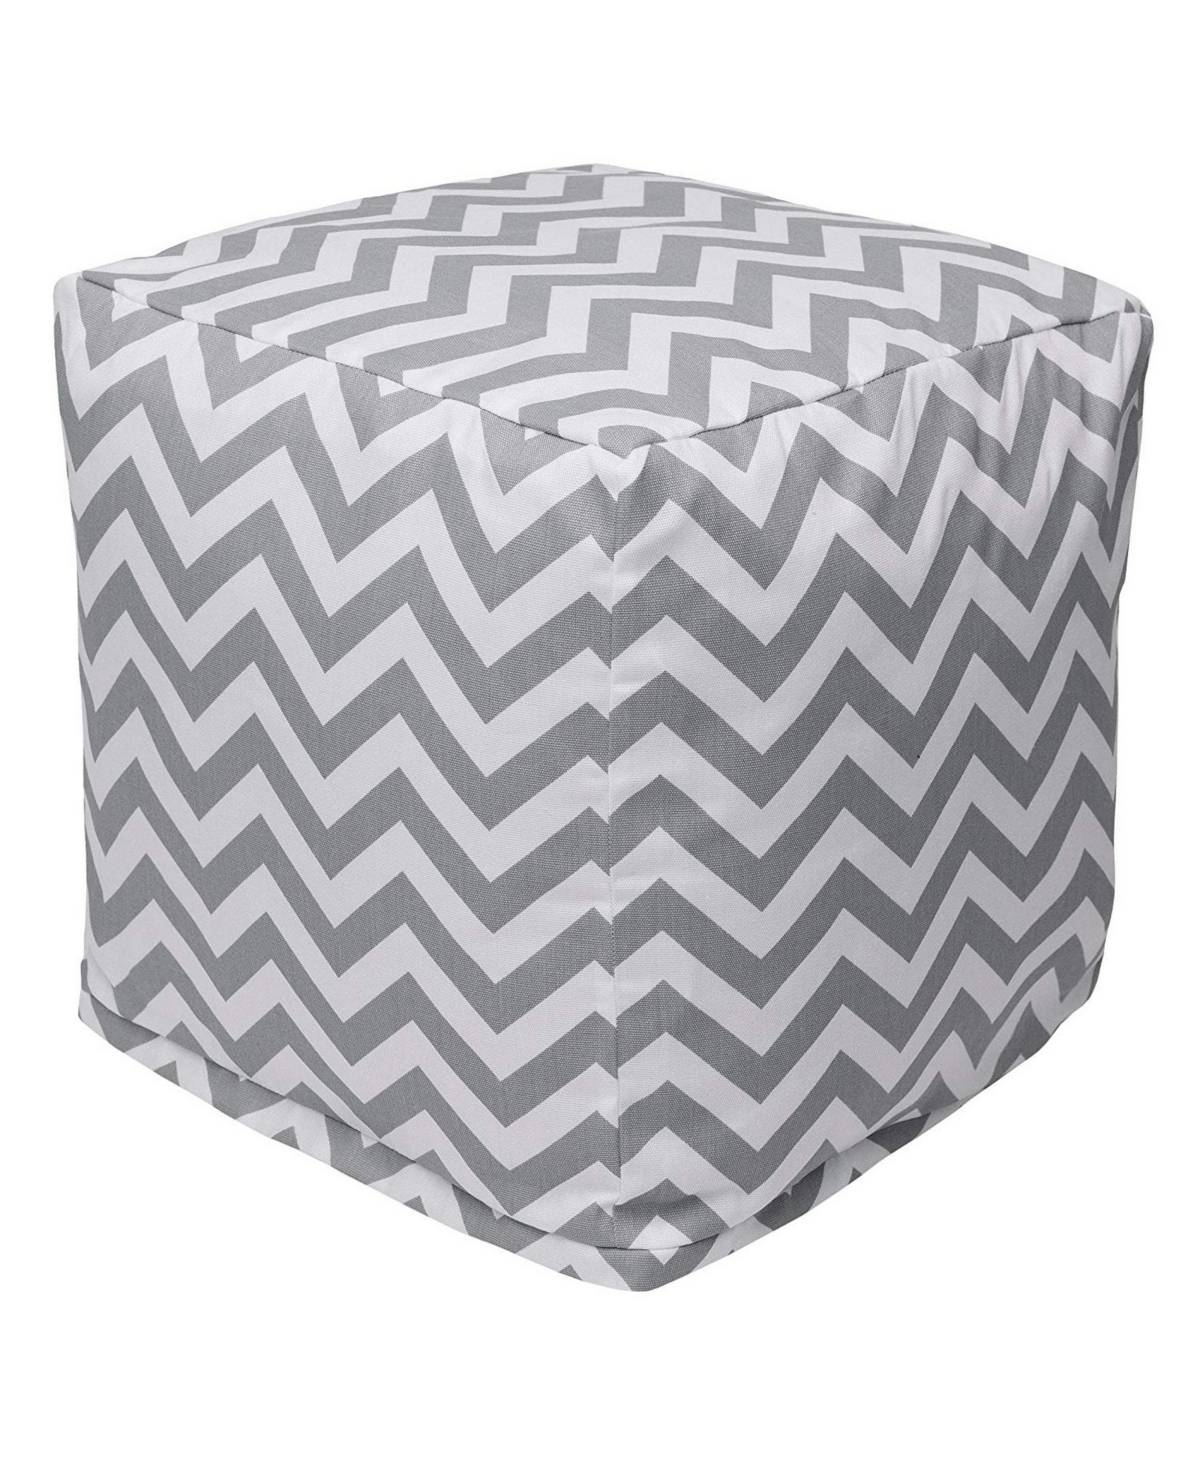 UPC 859072201552 product image for Majestic Home Goods Chevron Ottoman Pouf Cube with Removable Cover 17